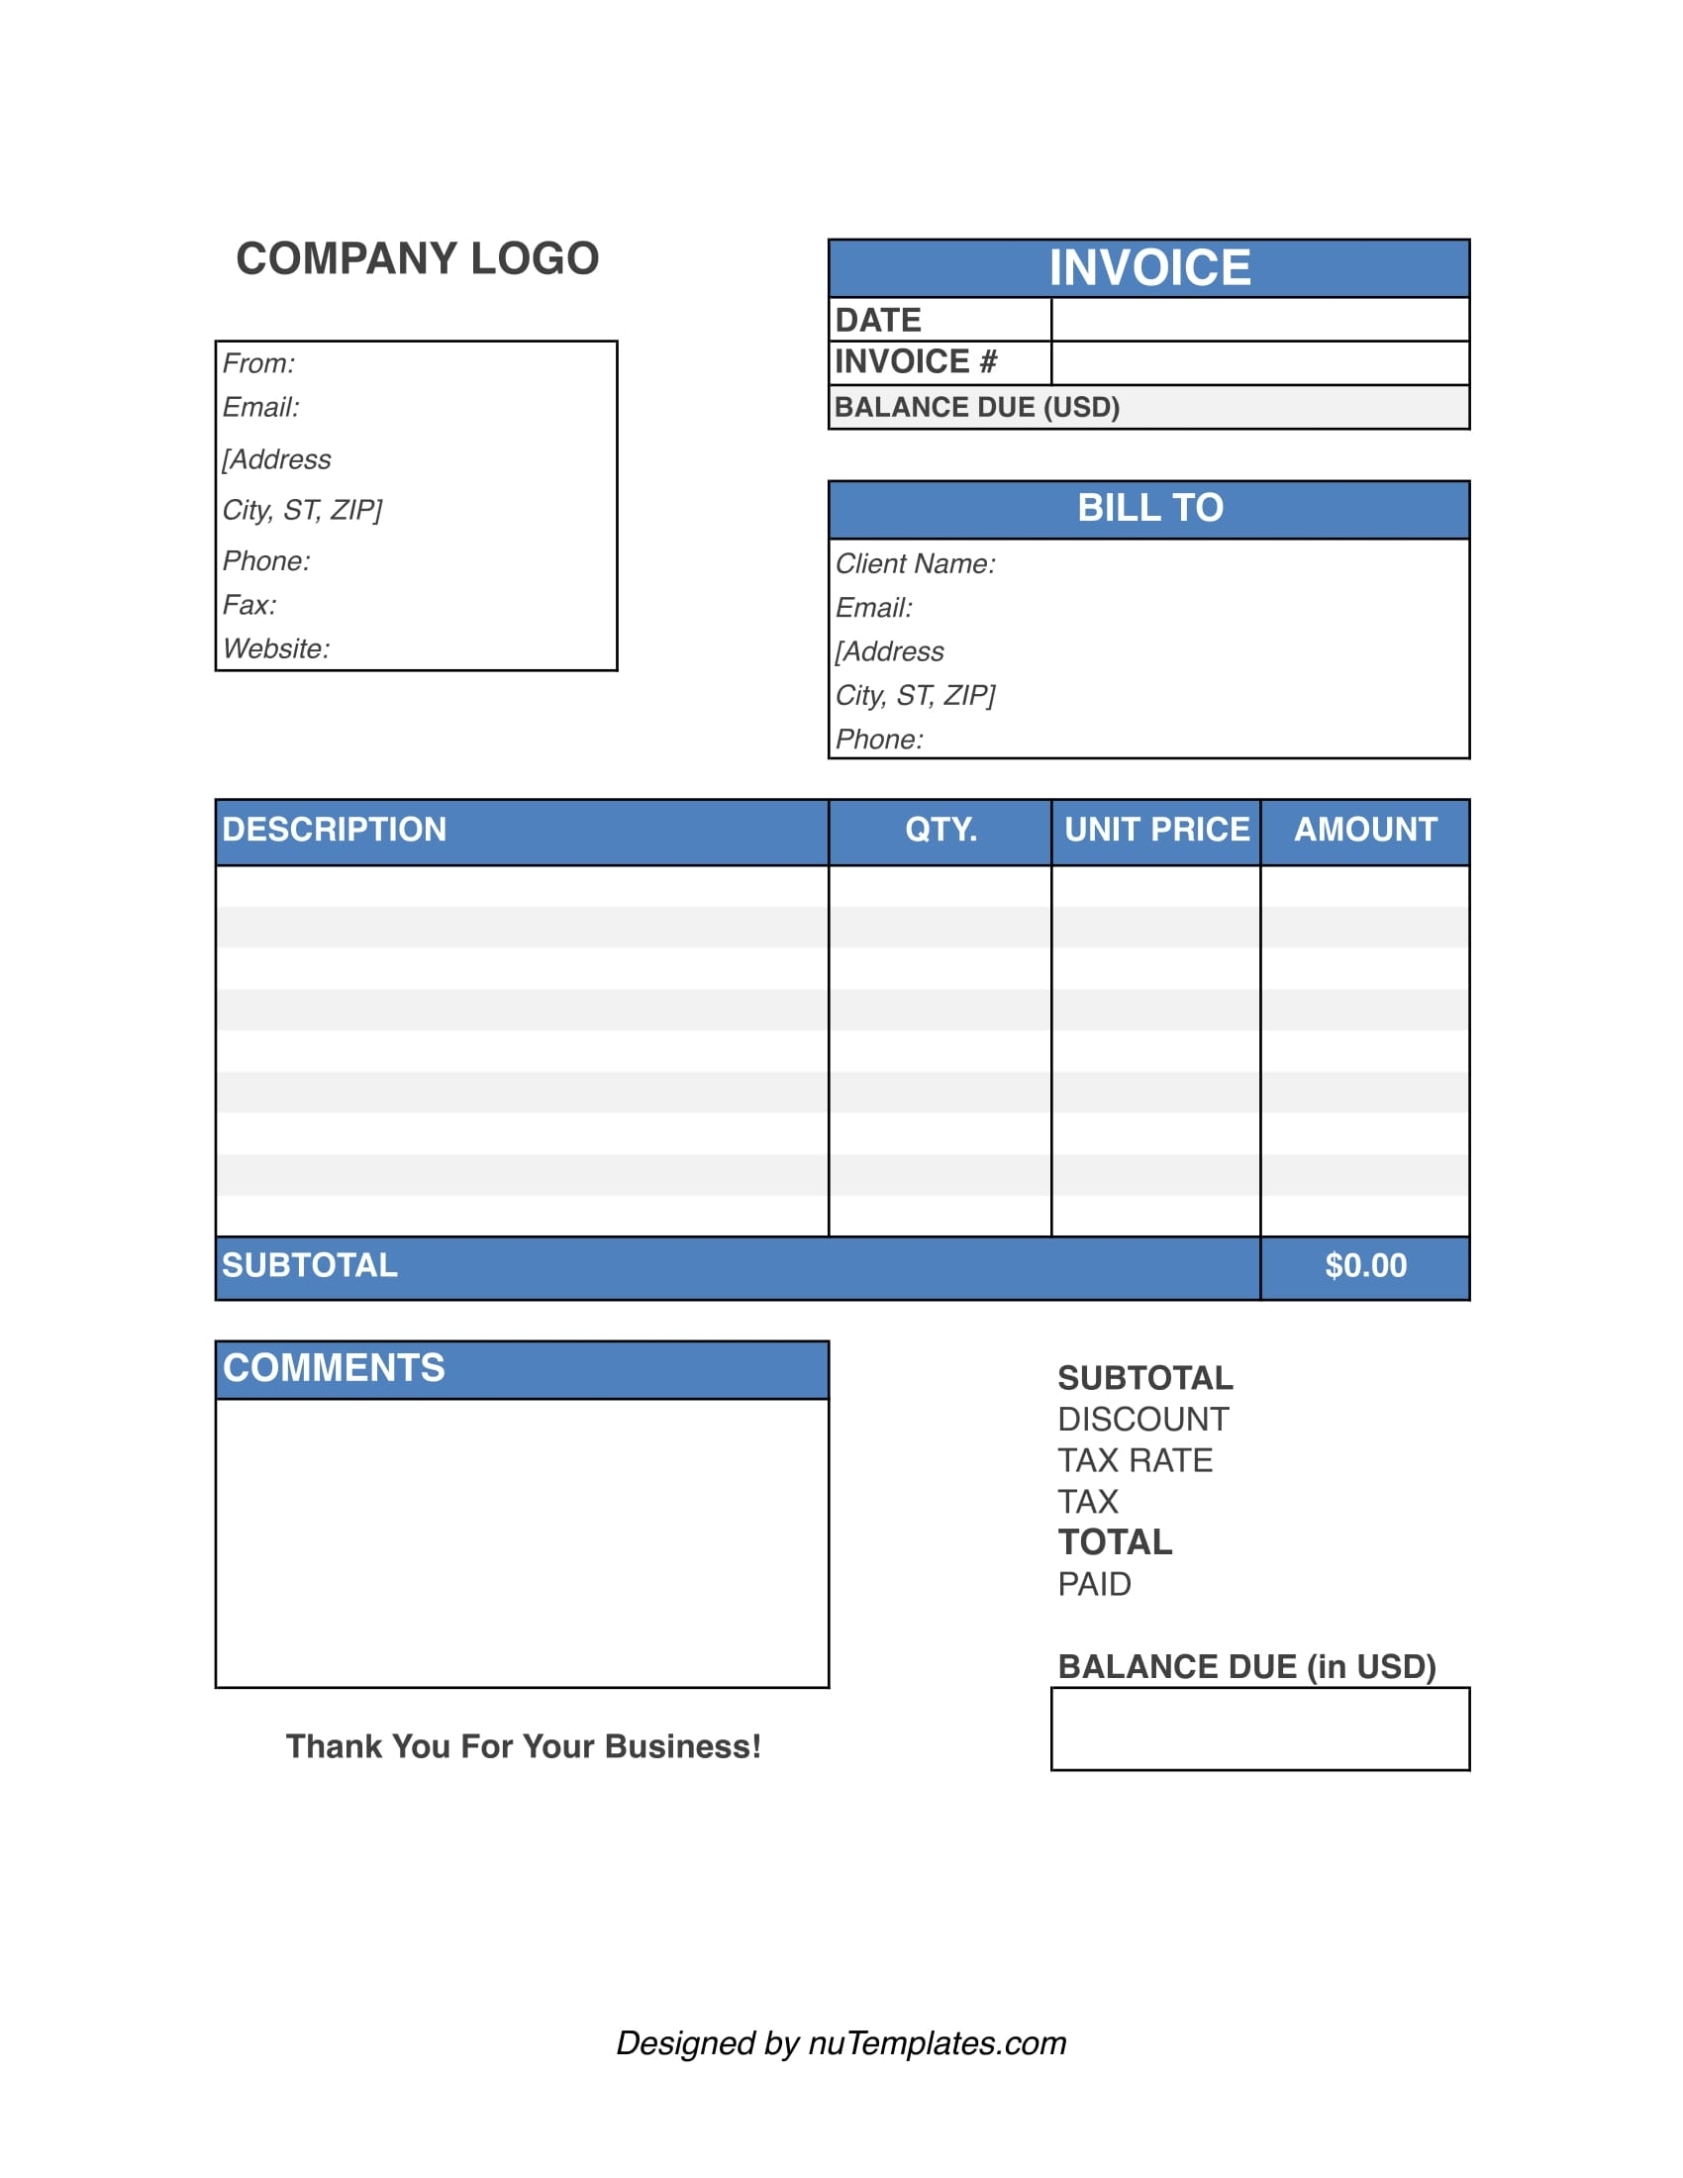 Cleaning Invoice Template - Cleaning Invoices | Nutemplates Intended For Invoice Template For Work Done